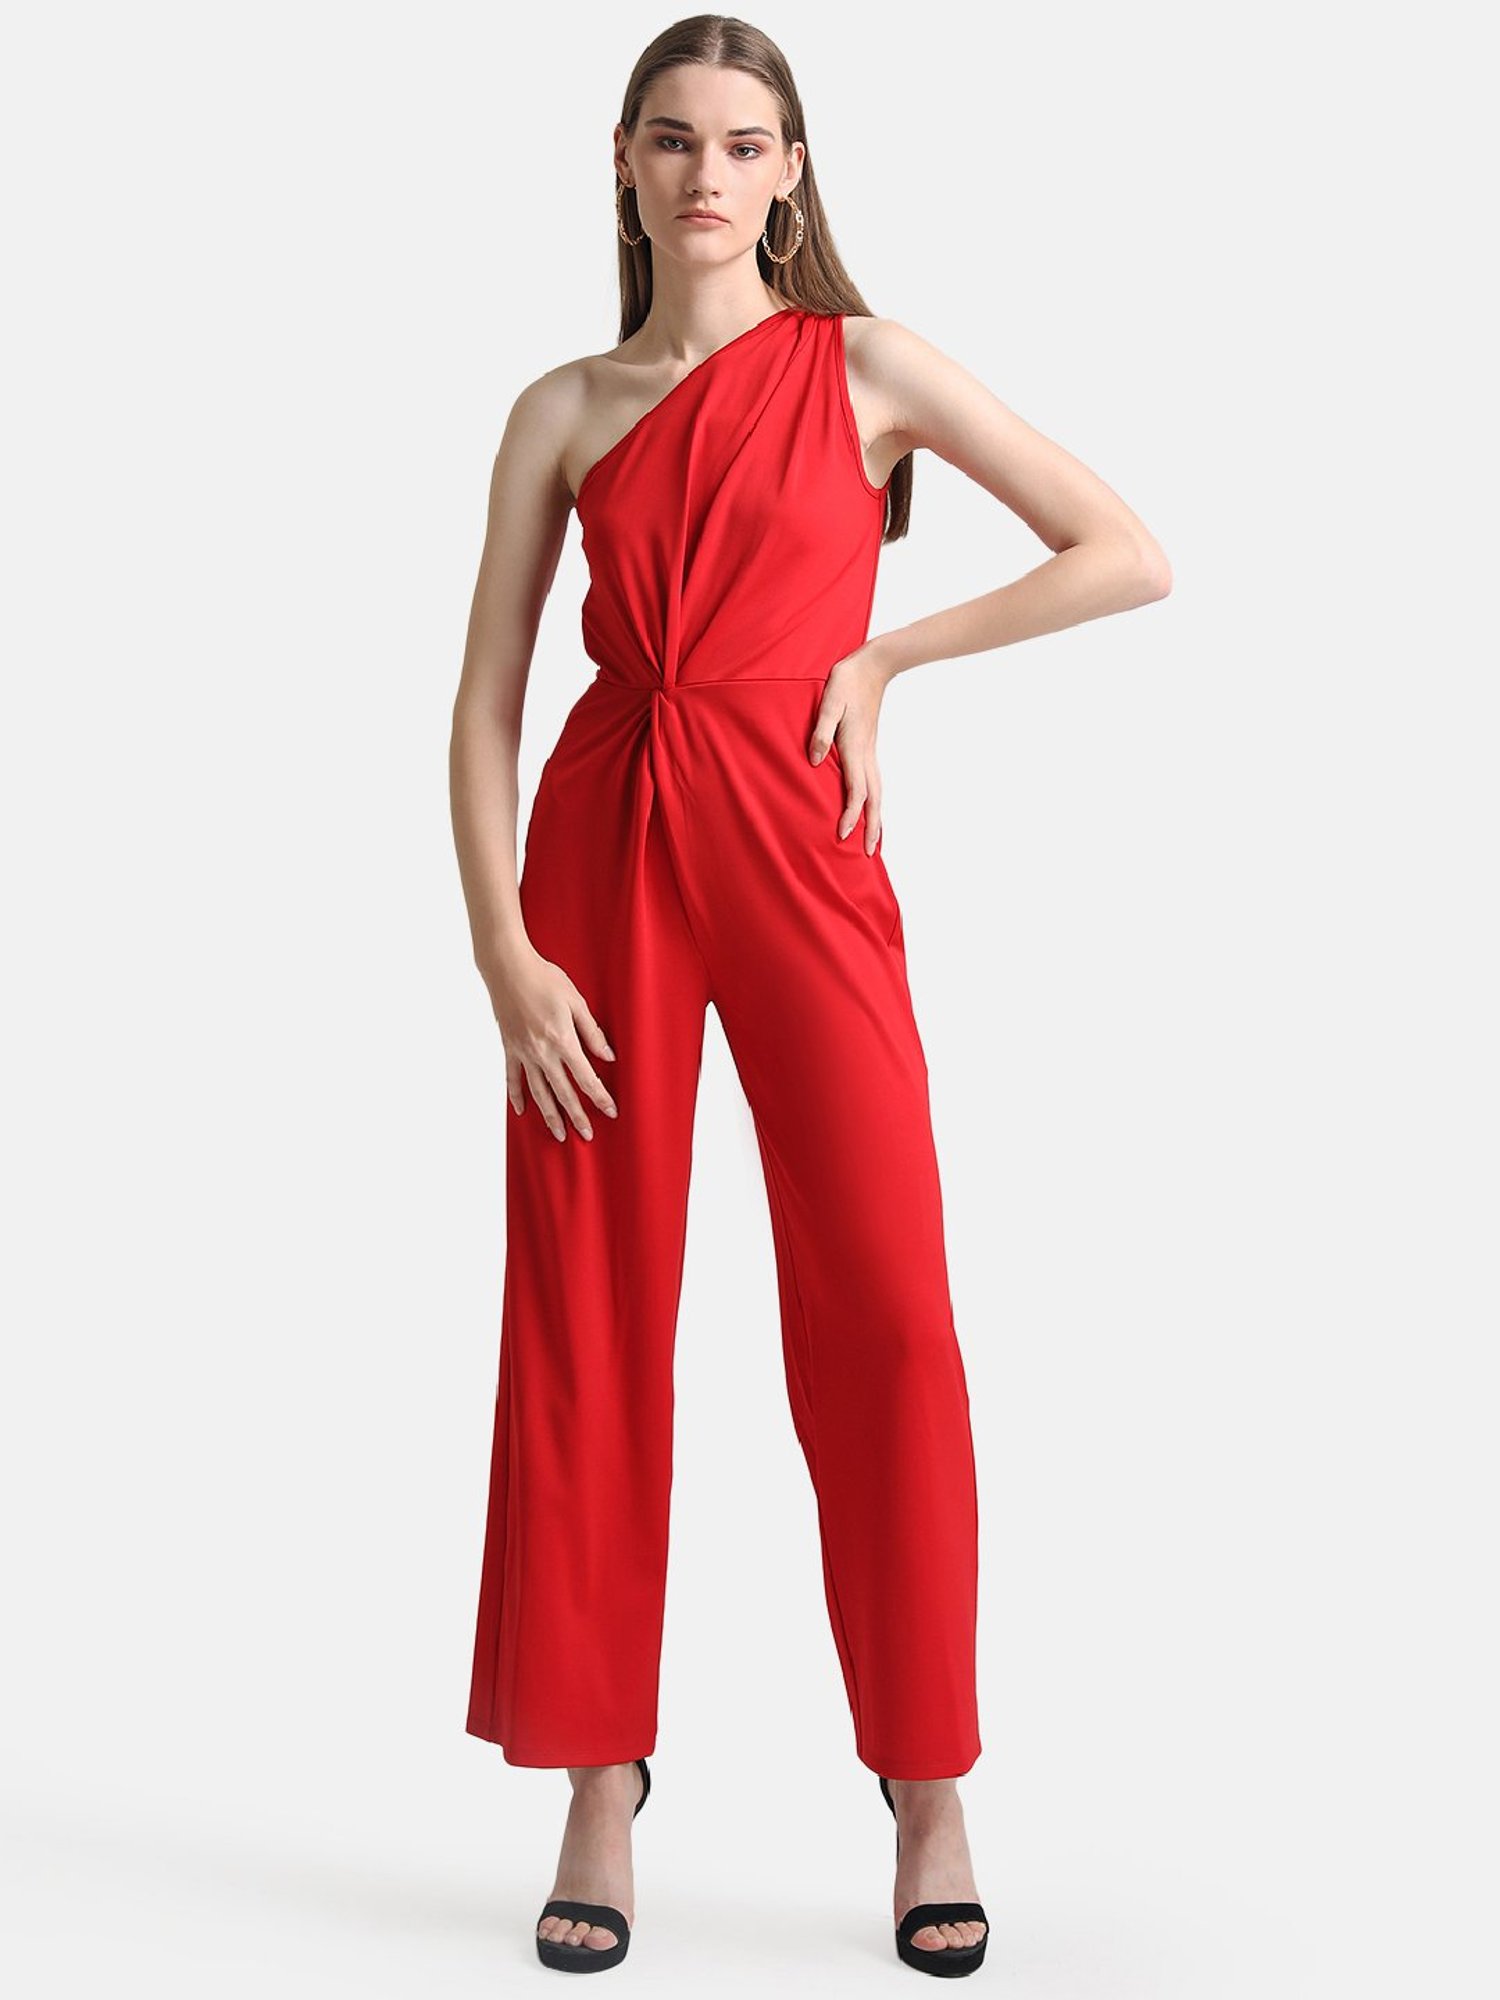 Buy Kazo Red One Shoulder Jumpsuit for Women's Online @ Tata CLiQ